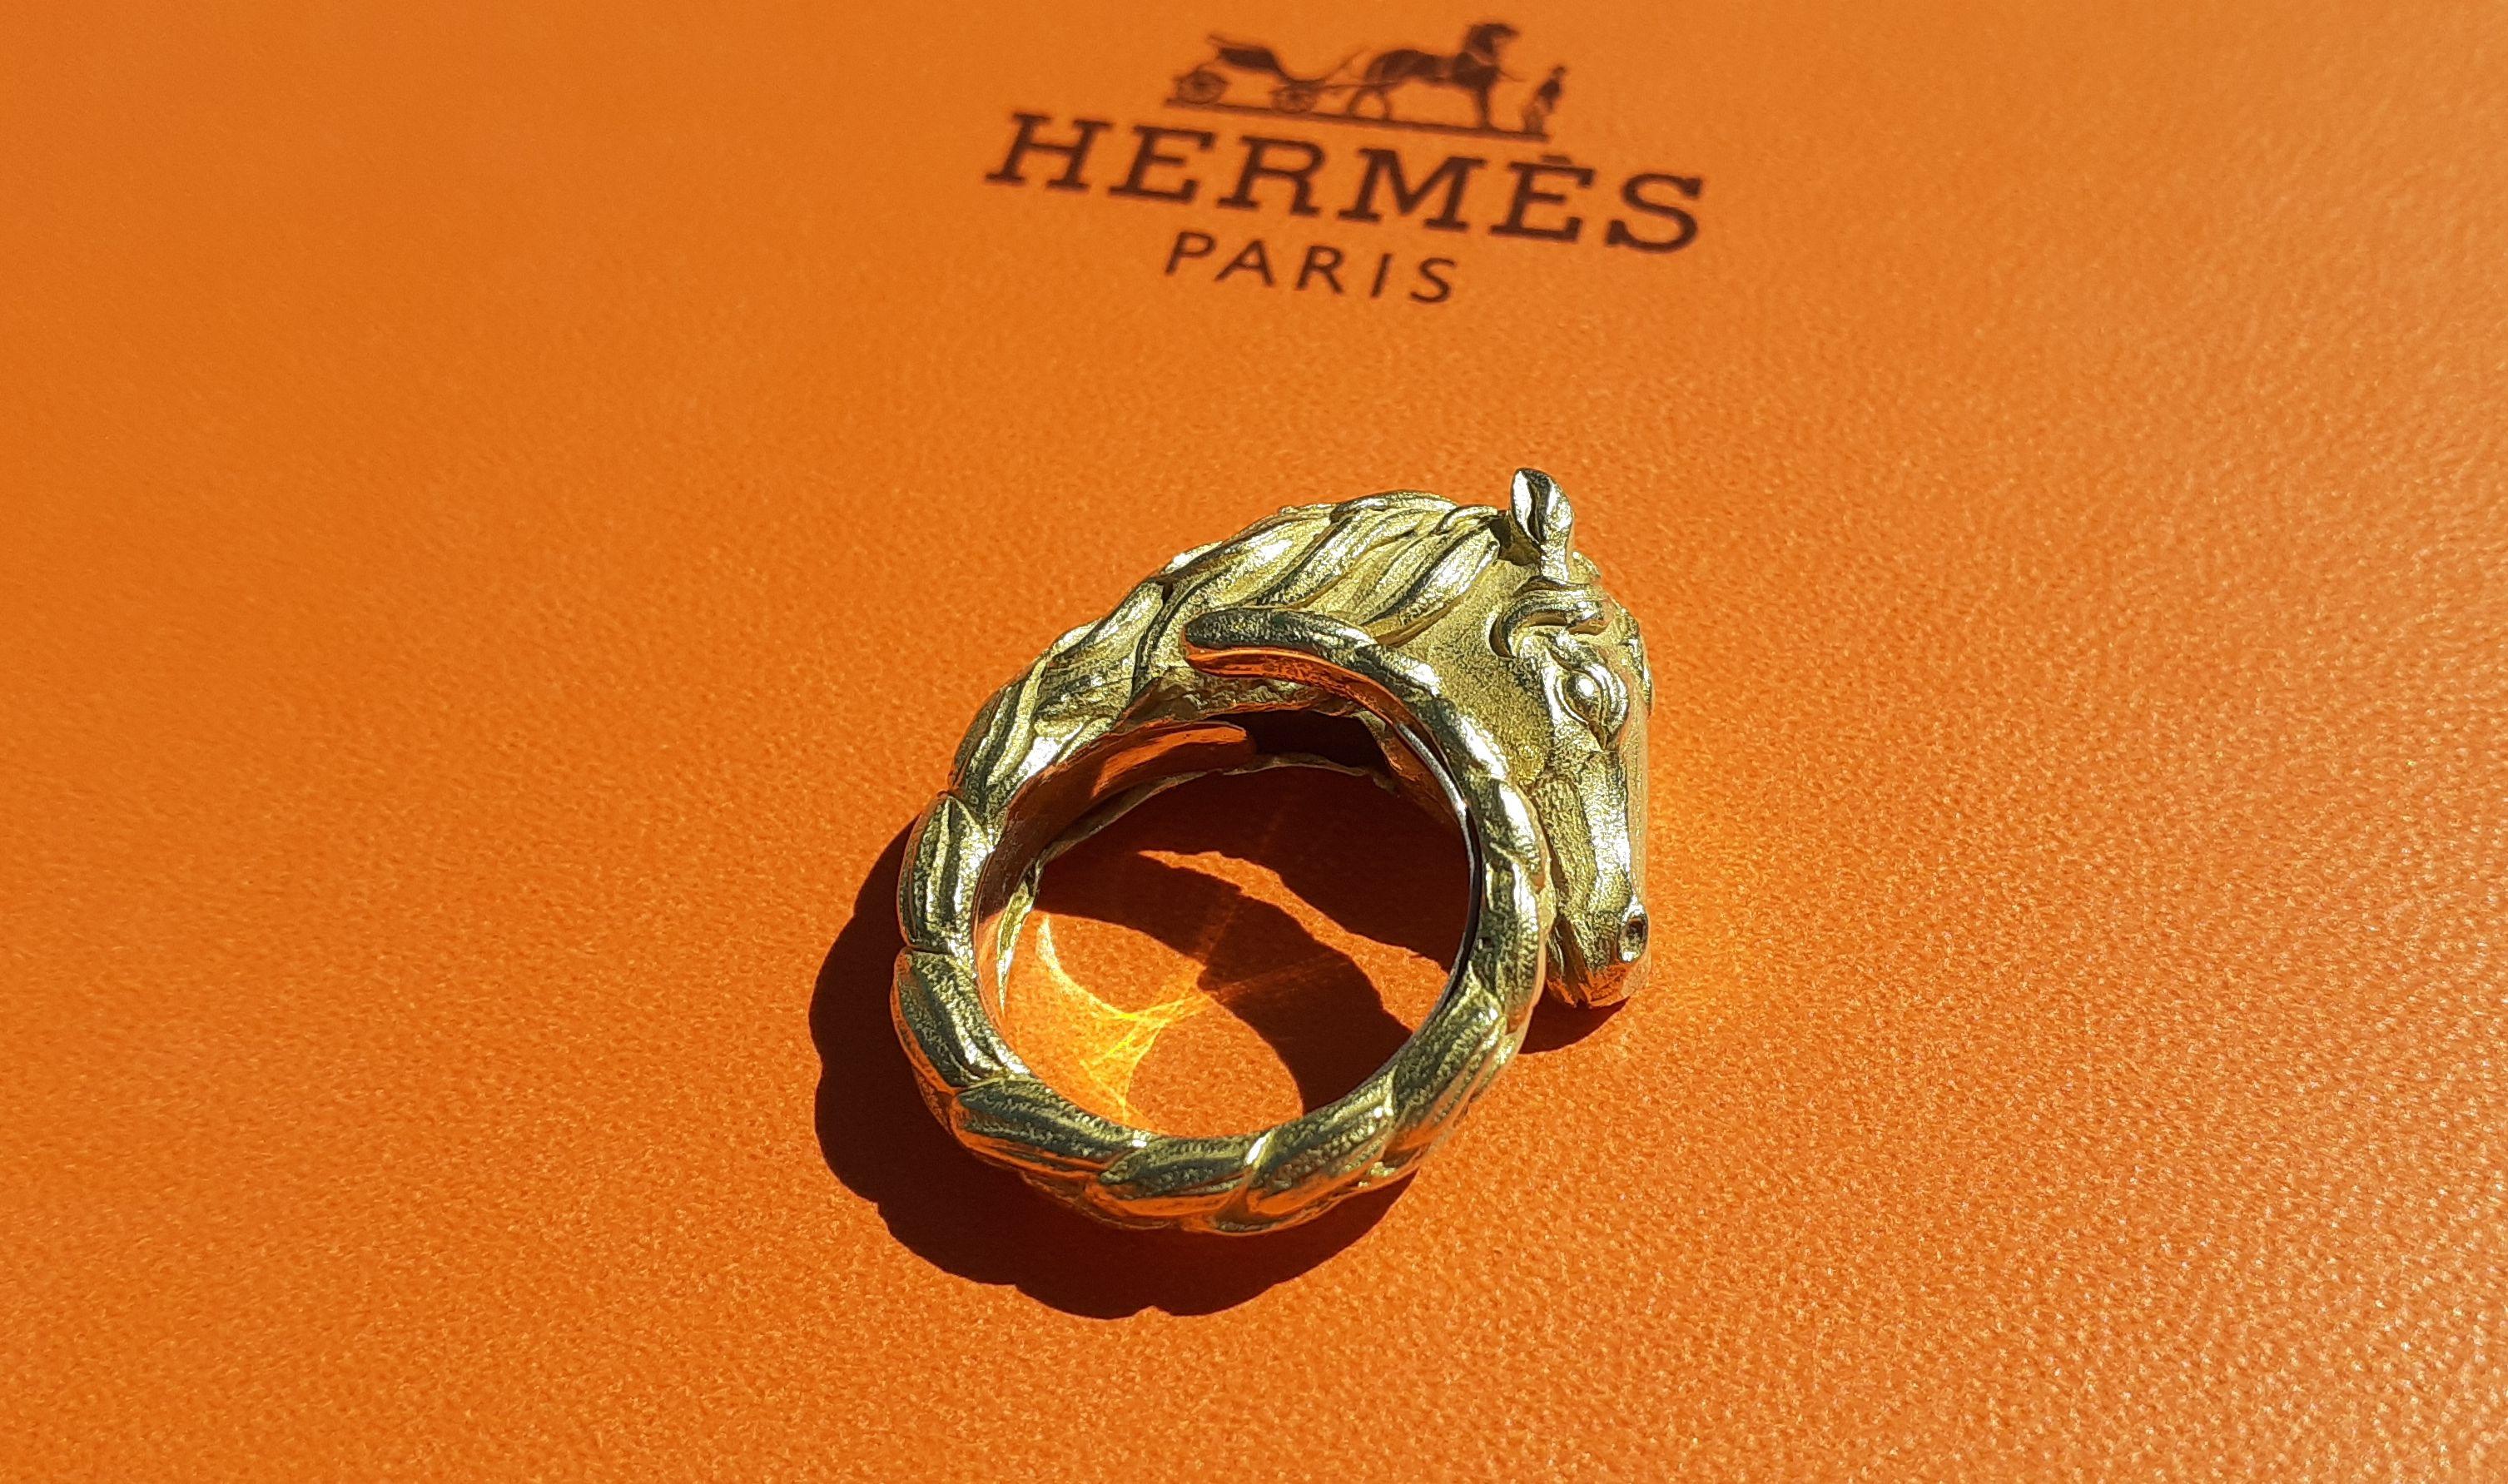 Exceptional and Gorgeous Authentic Hermès Ring

In the shape of a horse's head, the braided gold mane forming the ring

Vintage item

Made of Yellow Gold 18K 

